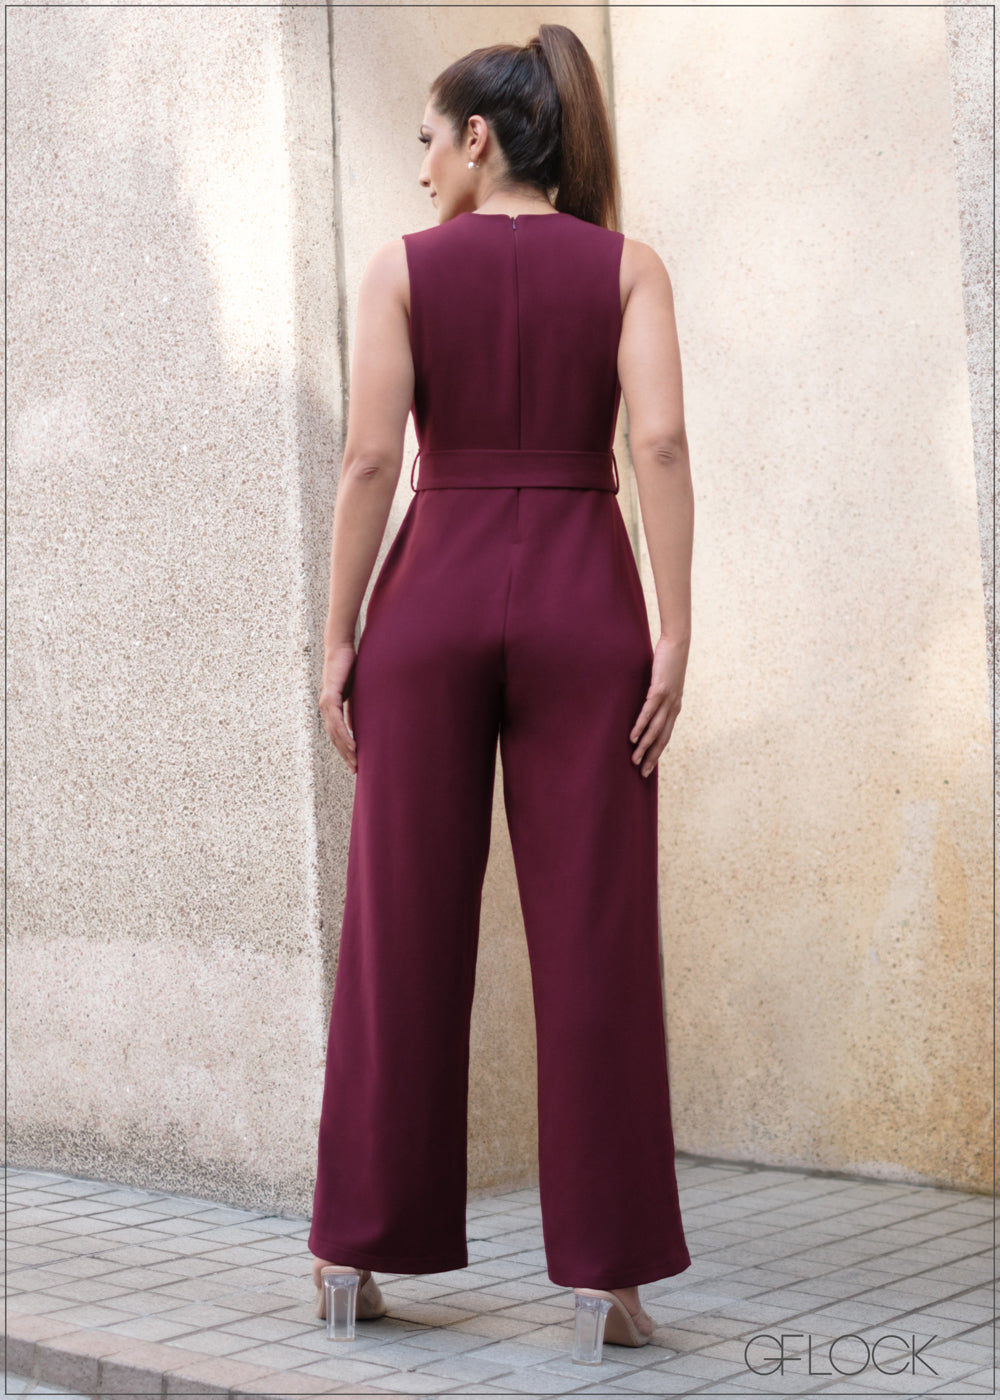 The NW Sleeveless Jumpsuit